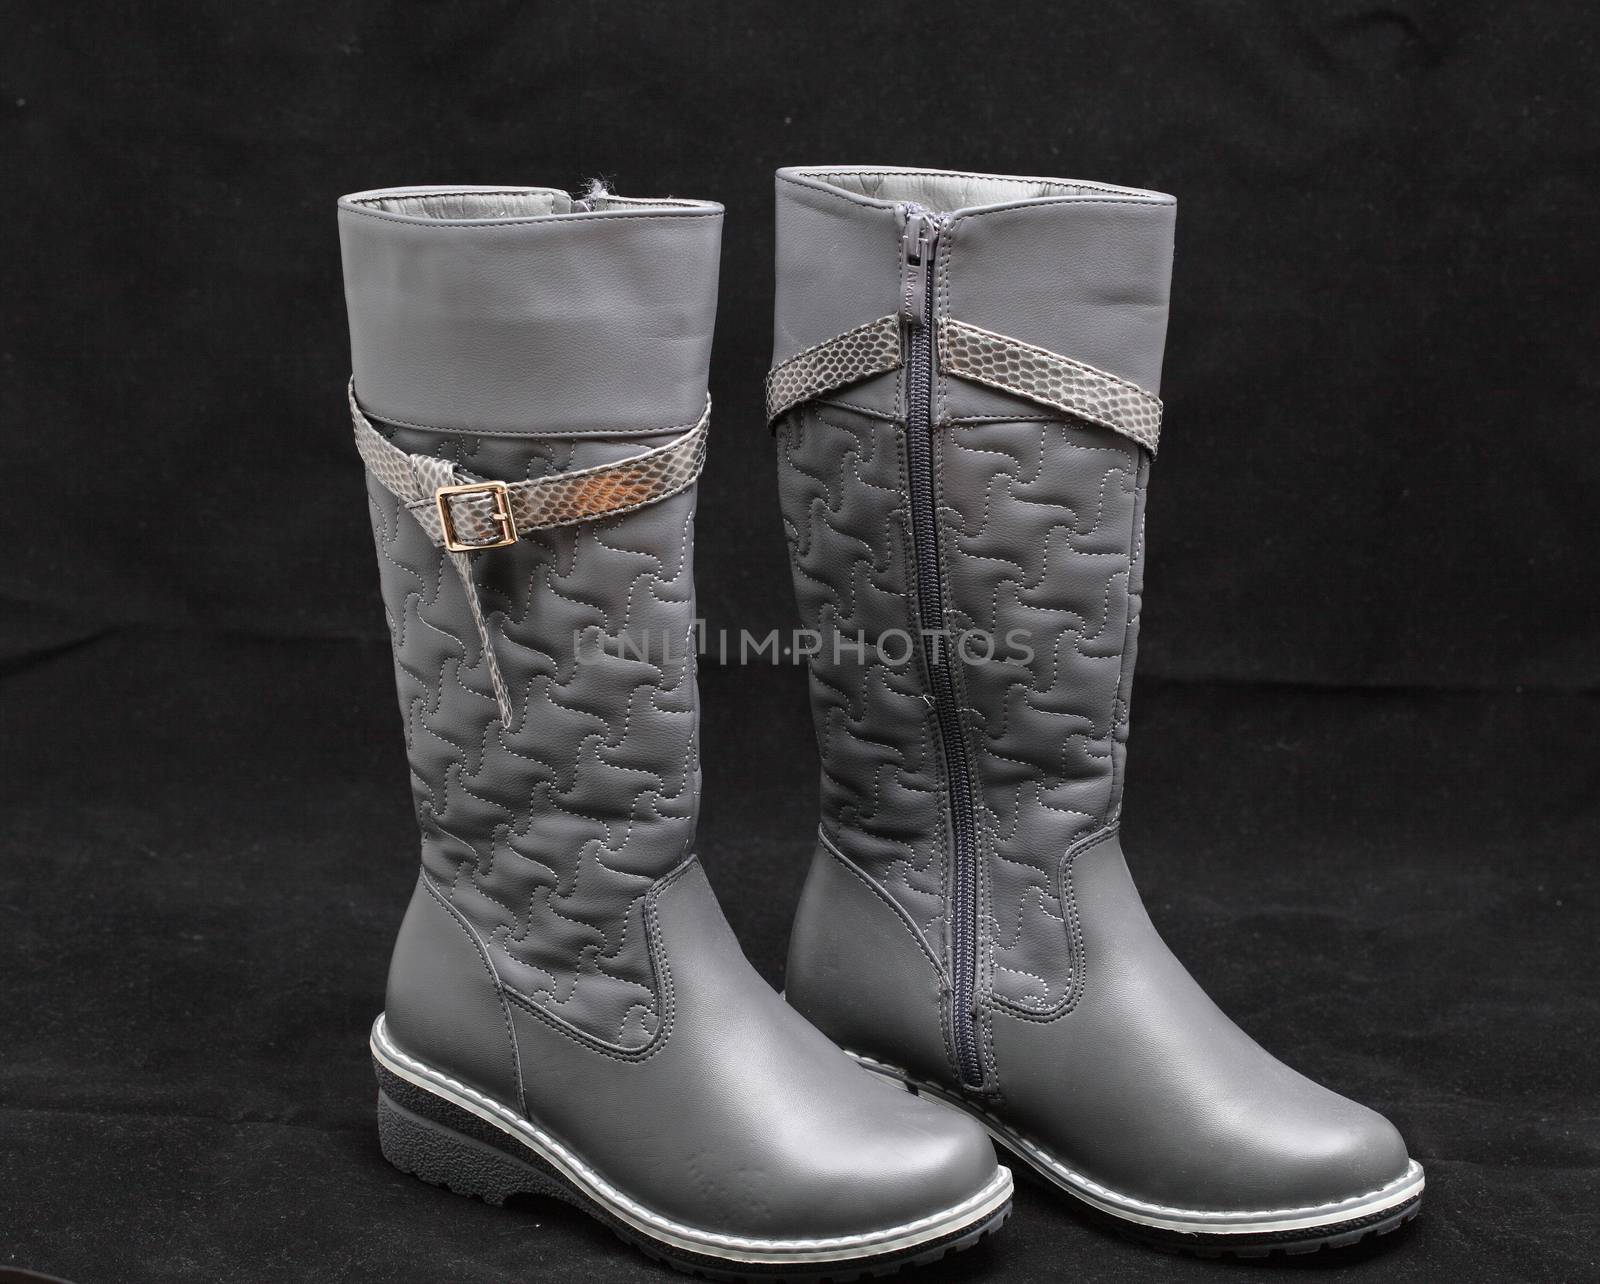 gray women's boots on black background